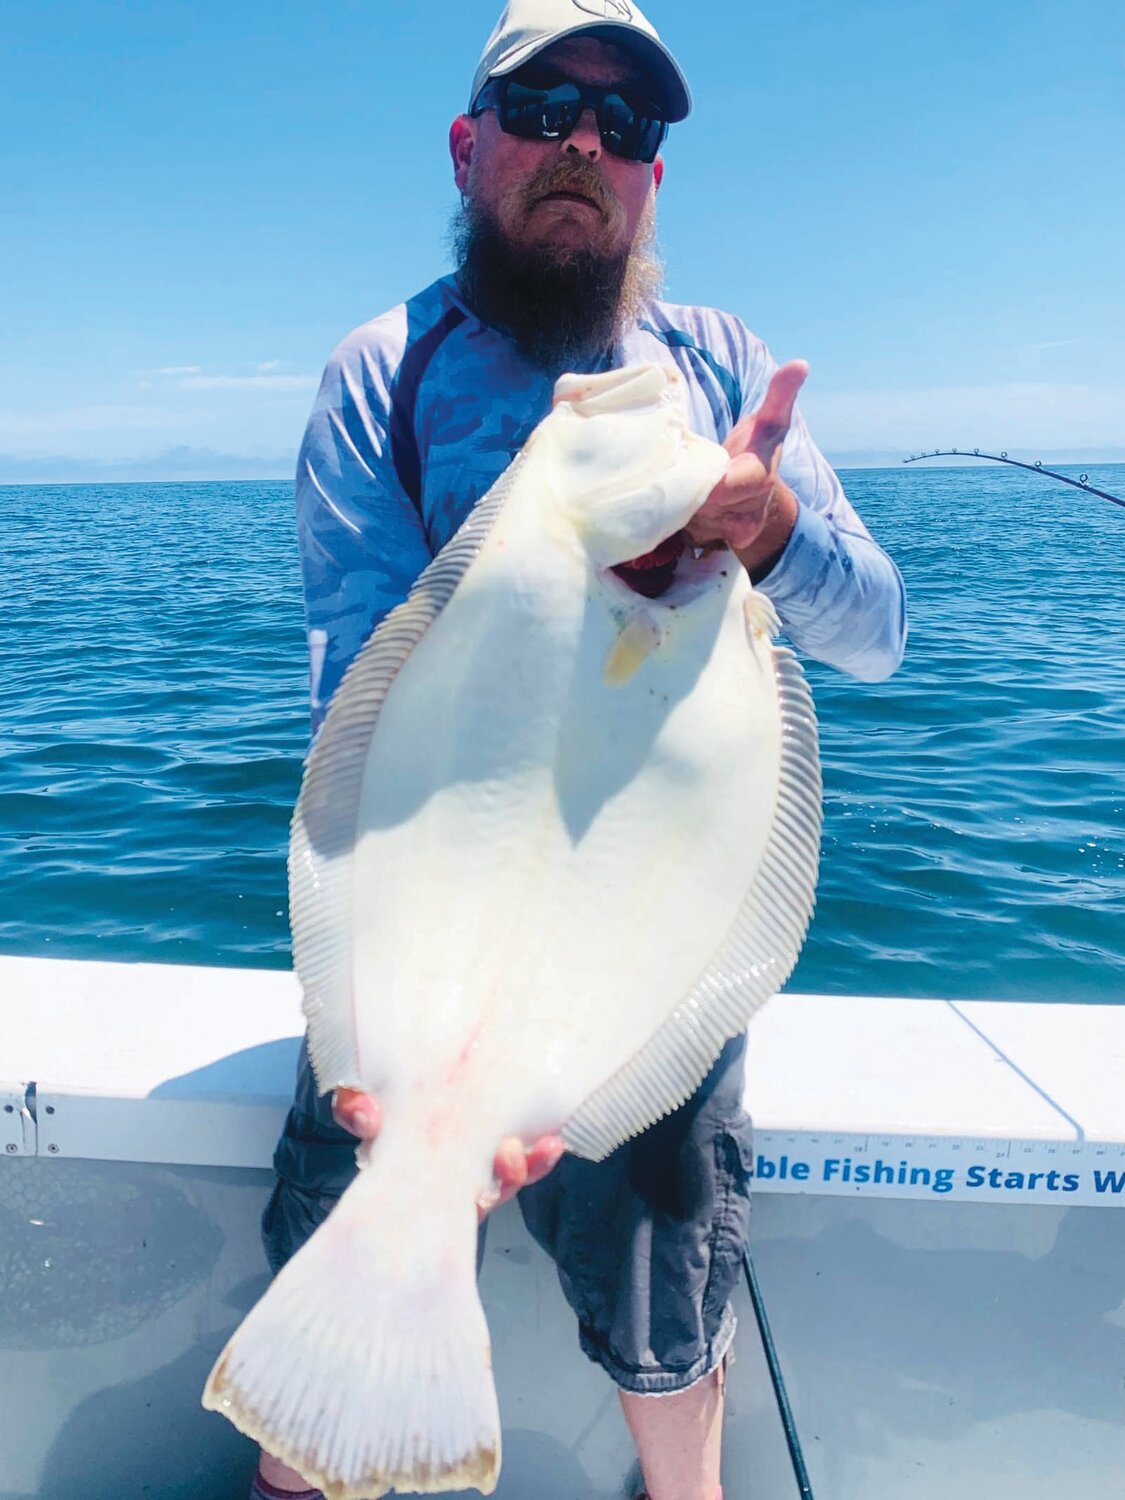 FLOUNDER: Capt. John Lee of JL Charters with a 30-inch summer flounder (fluke) caught off Pt. Judith, Narragansett, this weekend. (Submitted photo)